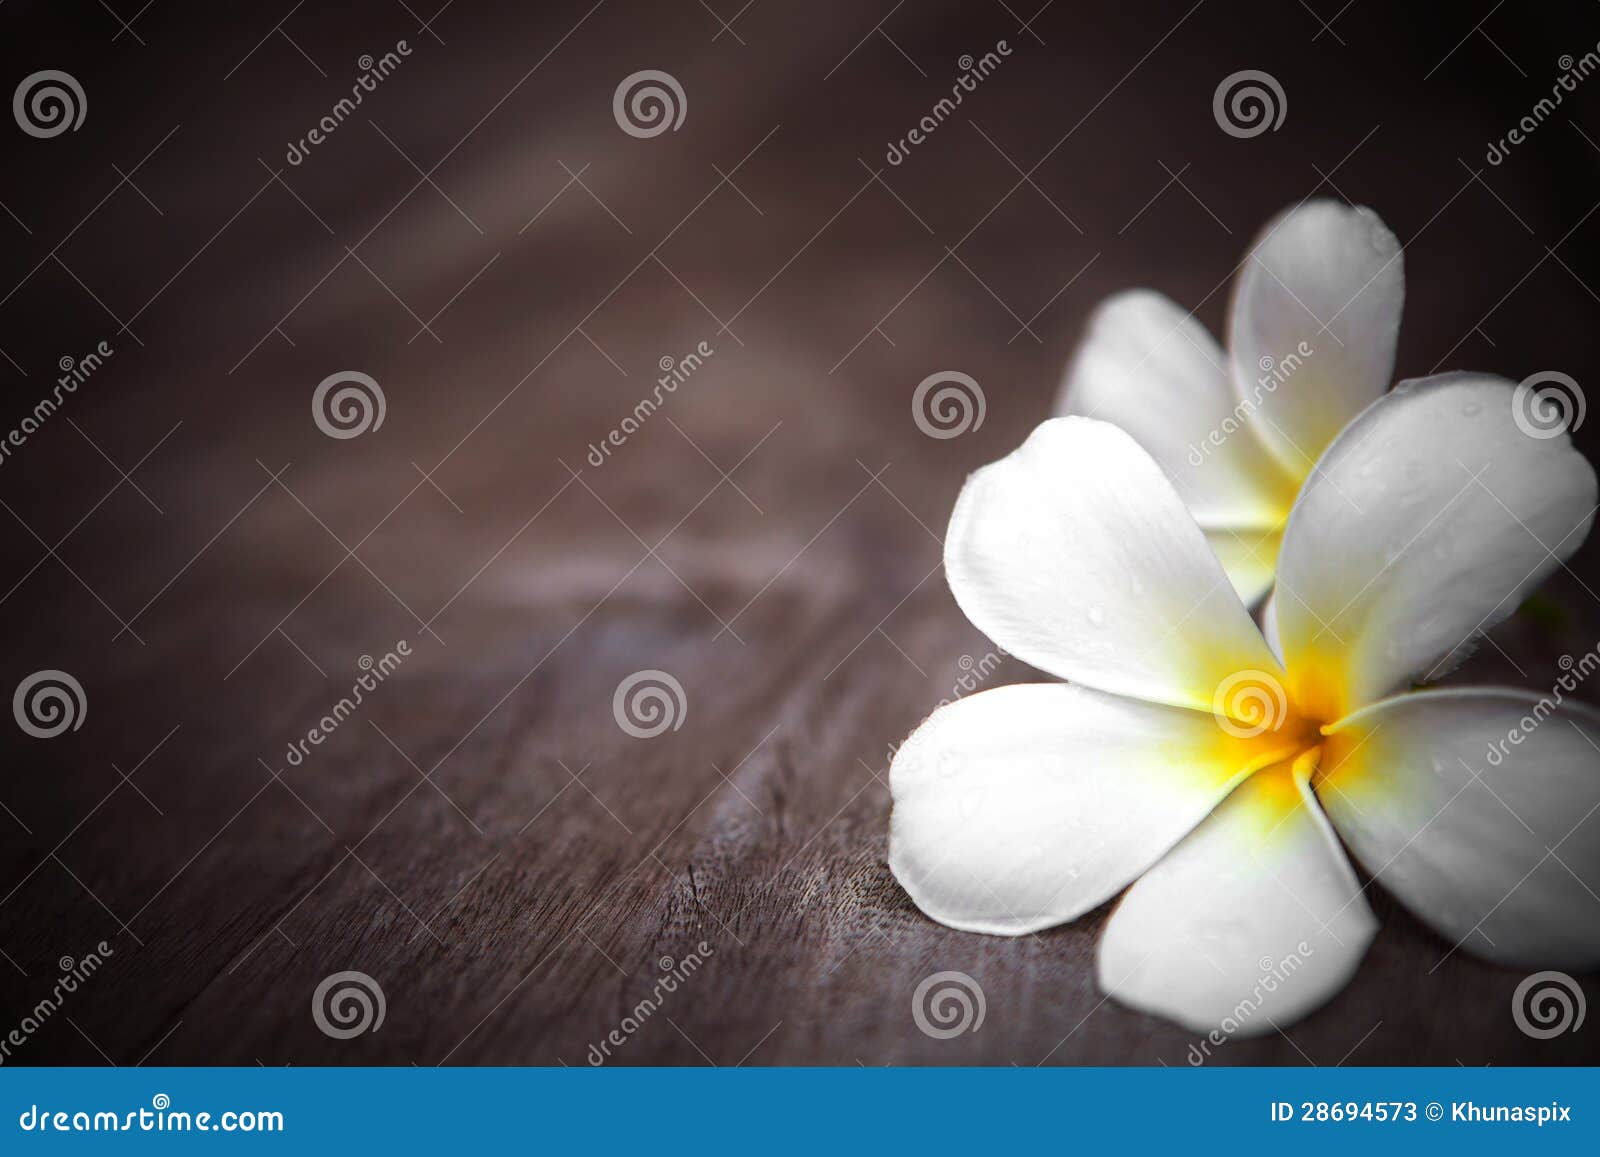 File of white frangipani flowers on wooden background with shallow depth of field